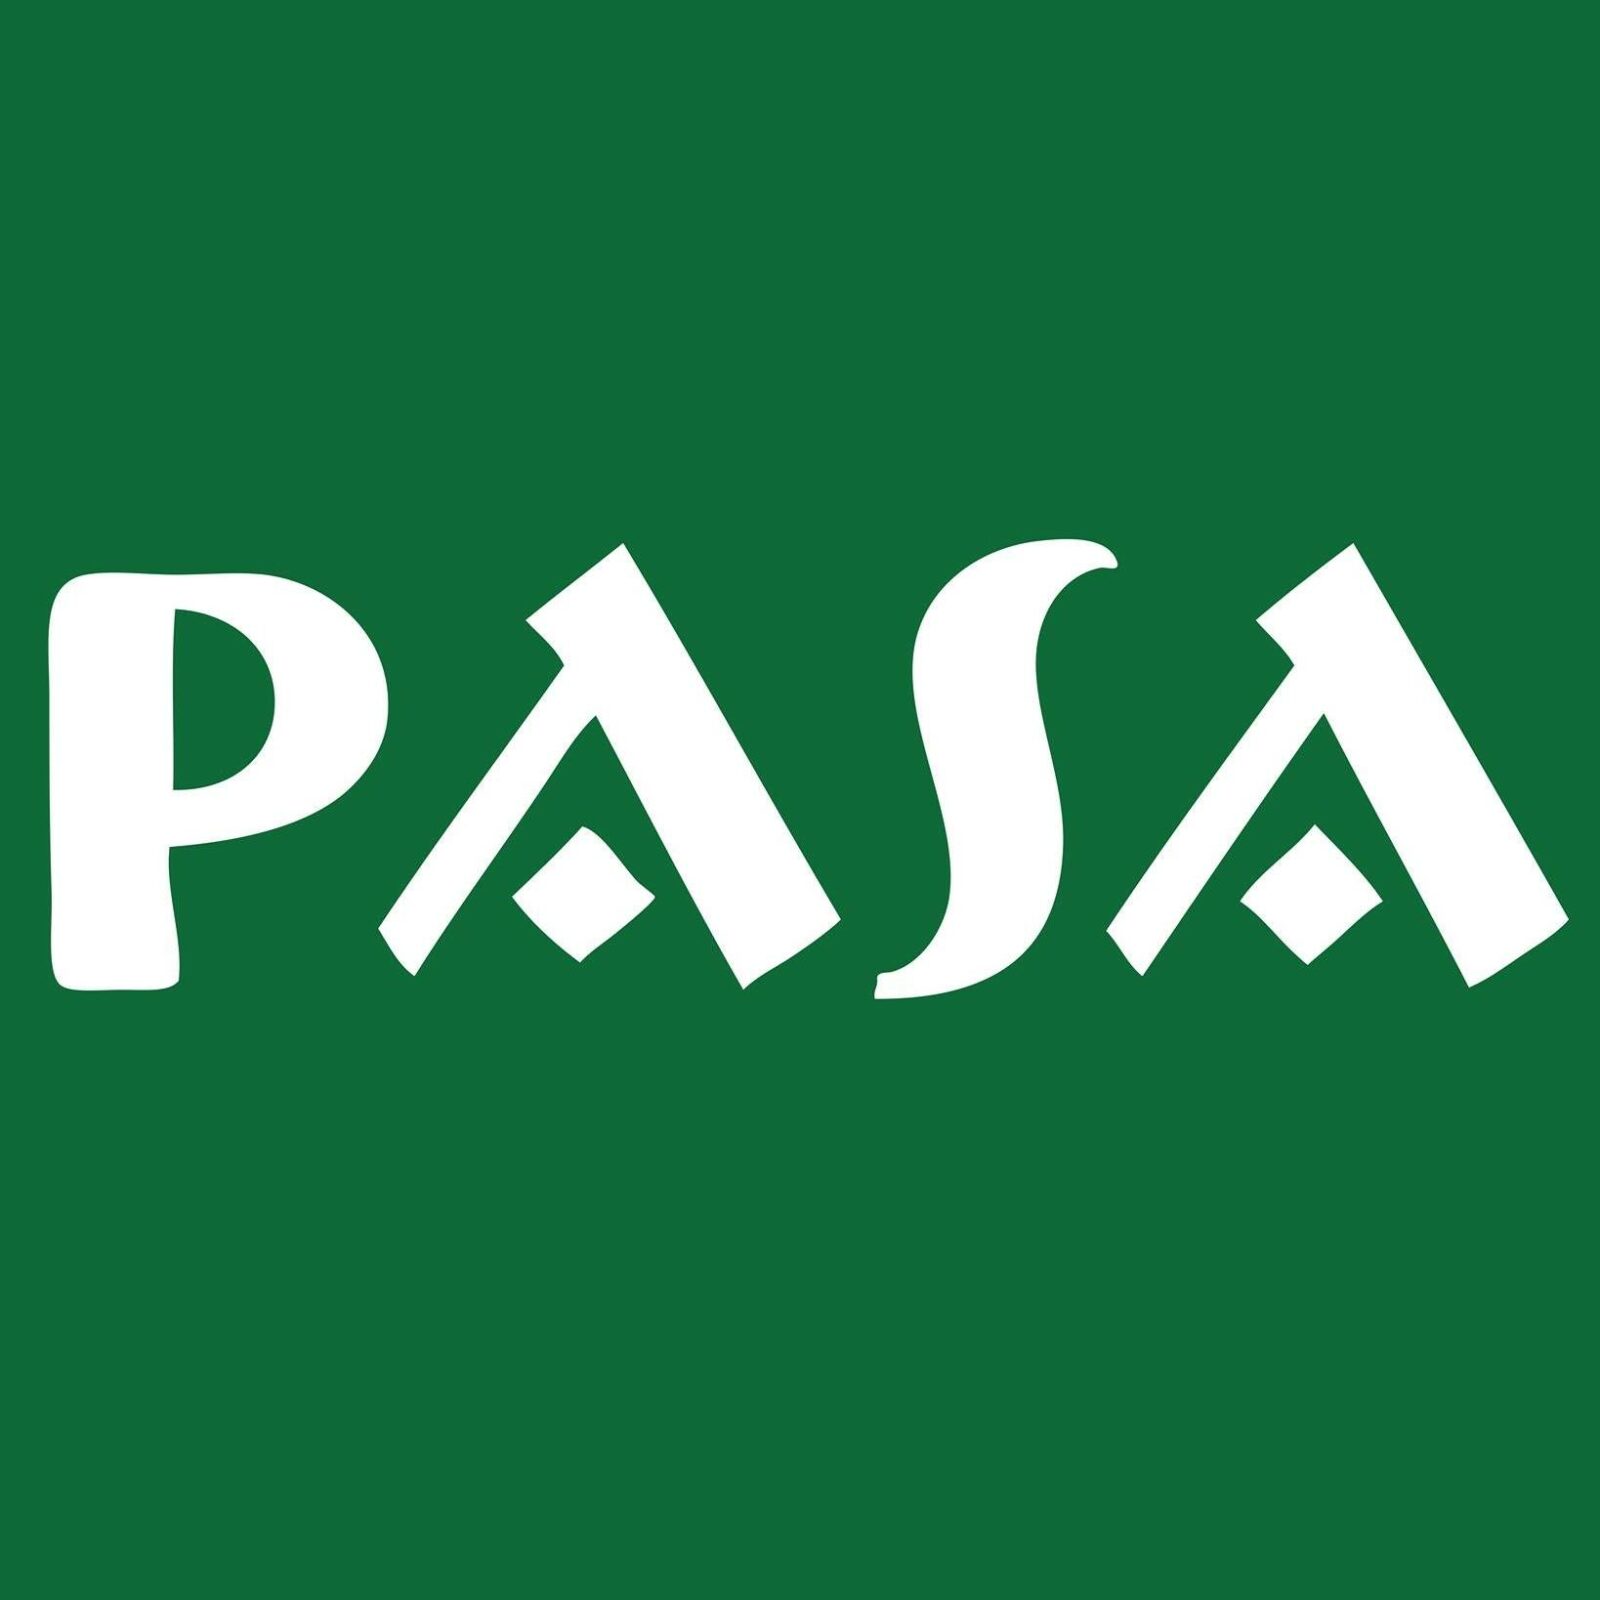 The logo for Pan African Sanctuary Society reading "PASA"